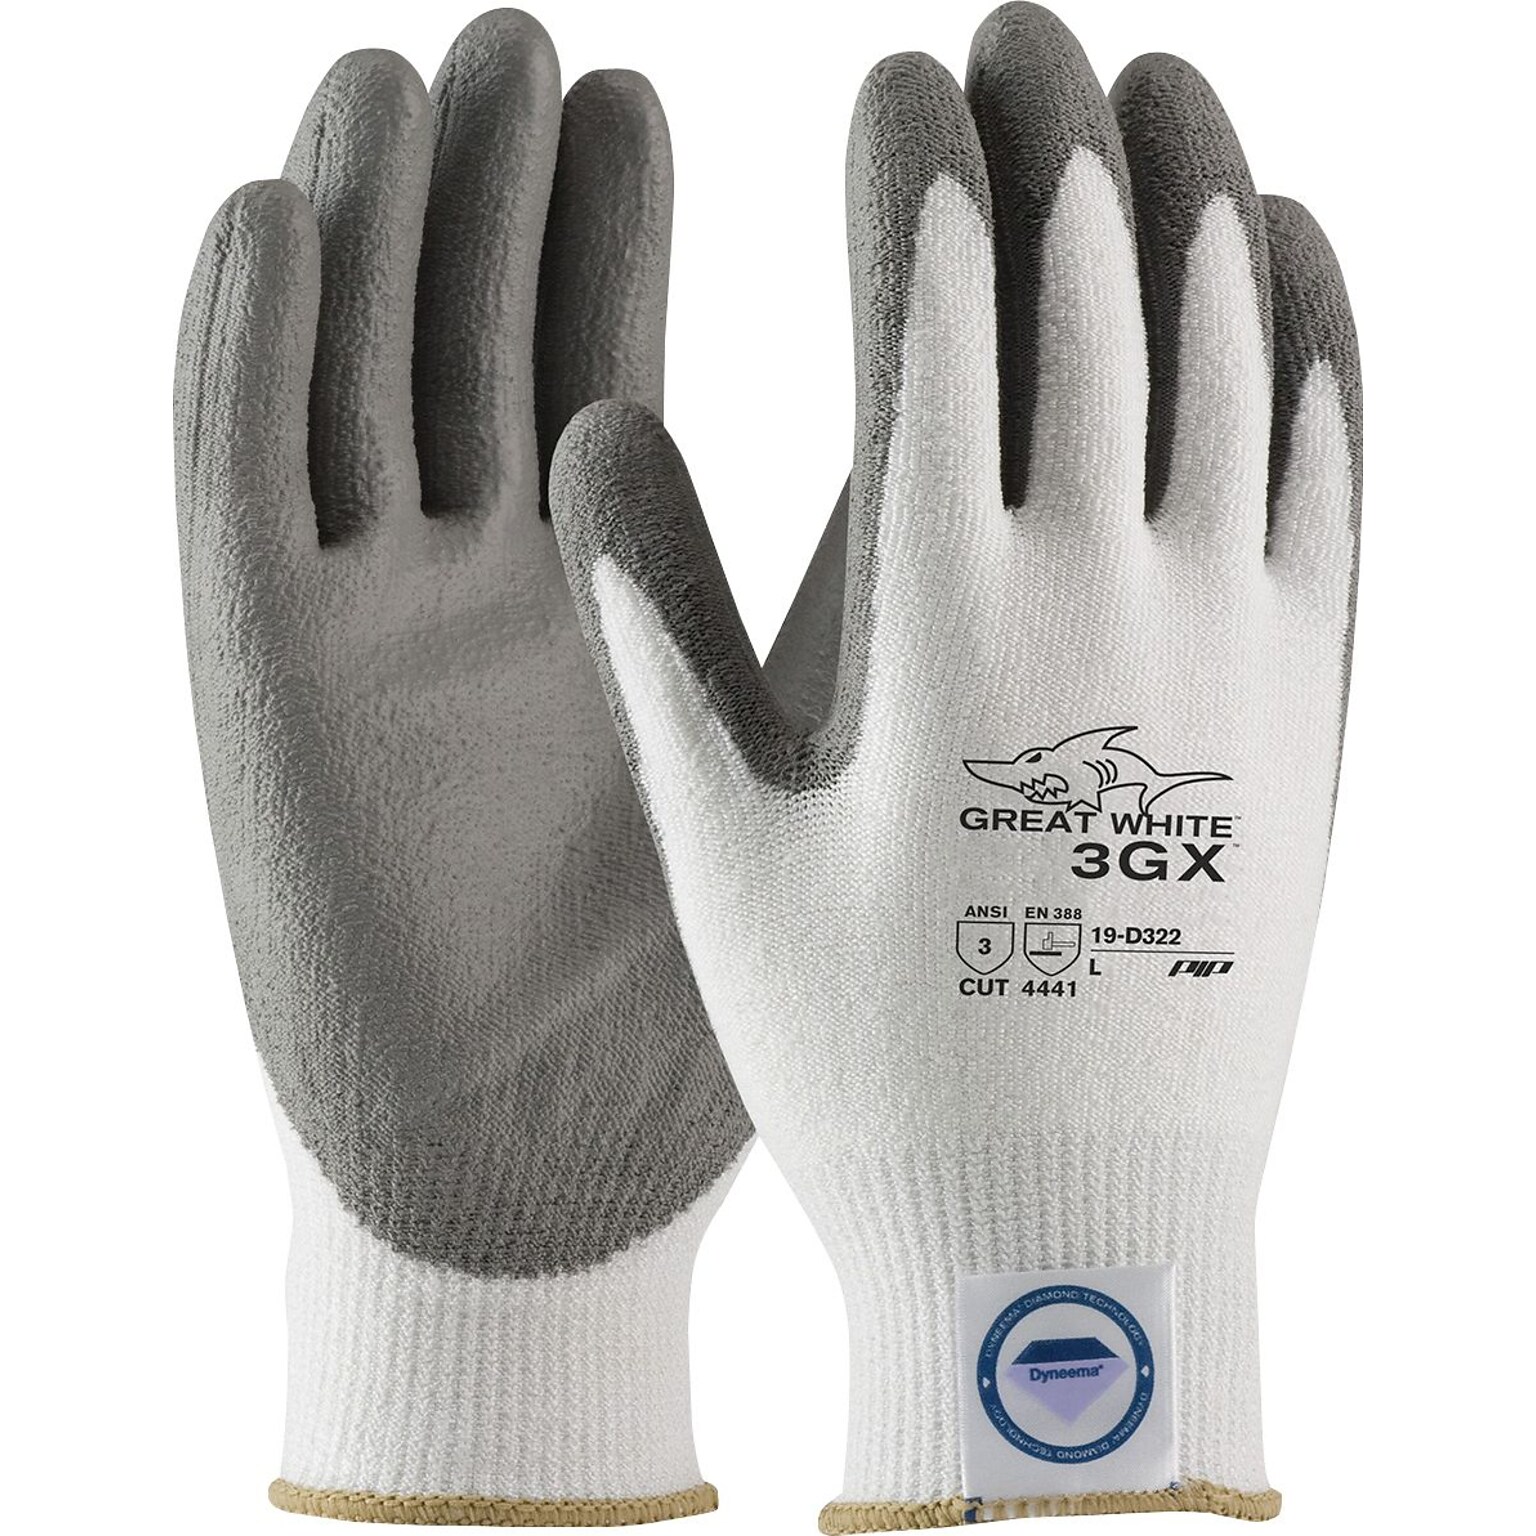 PIP Great White Dyneema Diamond/Lycra 3GX™ Cut-Resistant Polyurethane Coated Gloves, Small, White/Gray (19-D322/S)